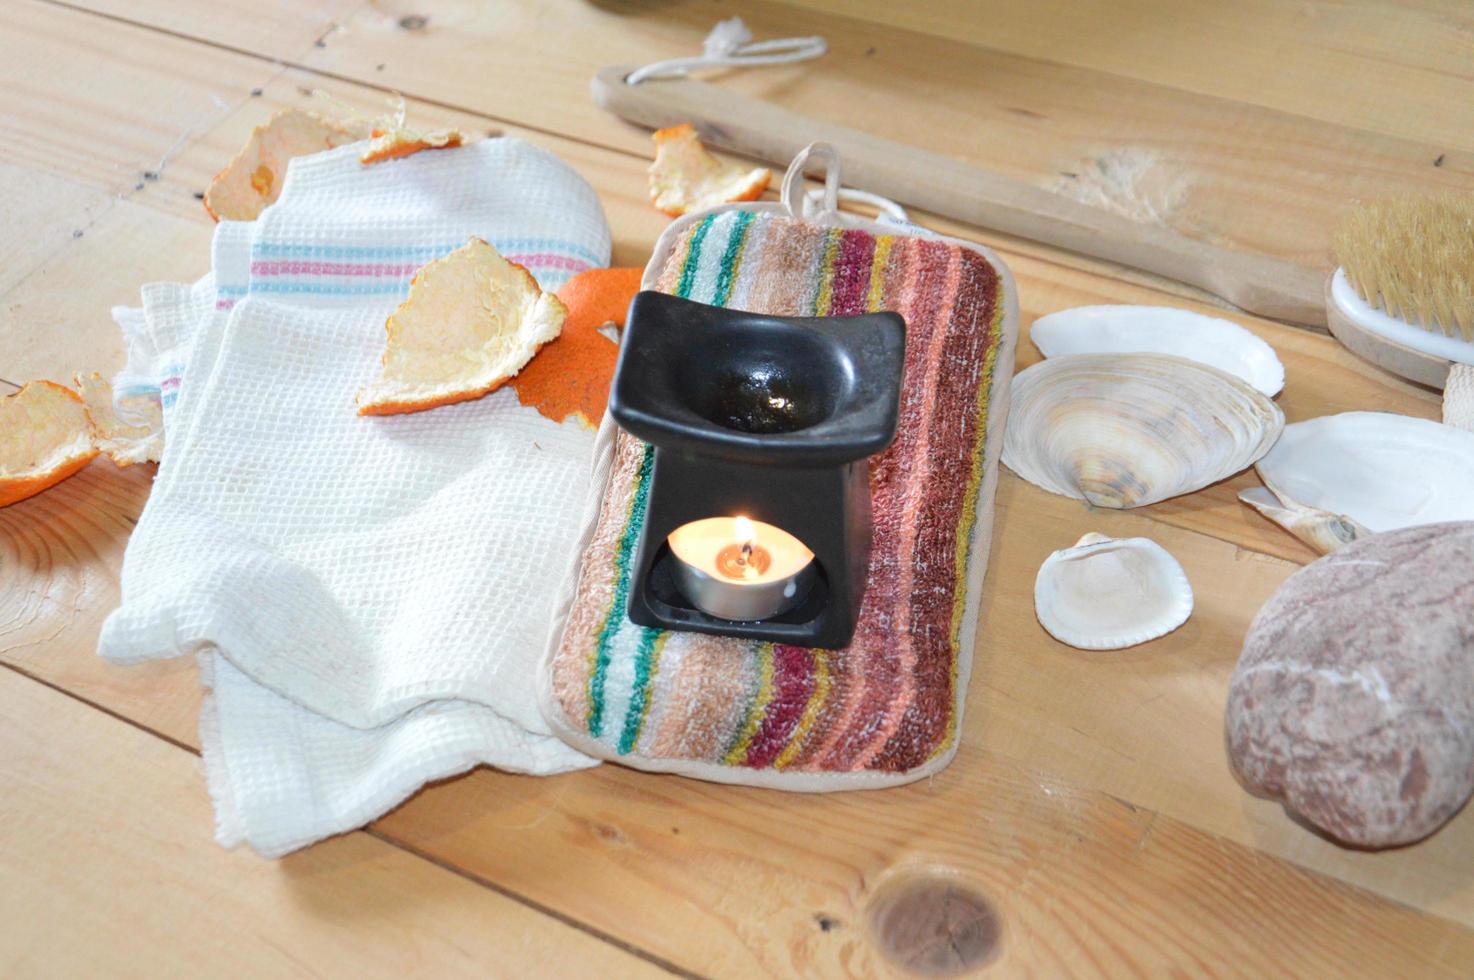 Spa items for sauna and relaxation photo